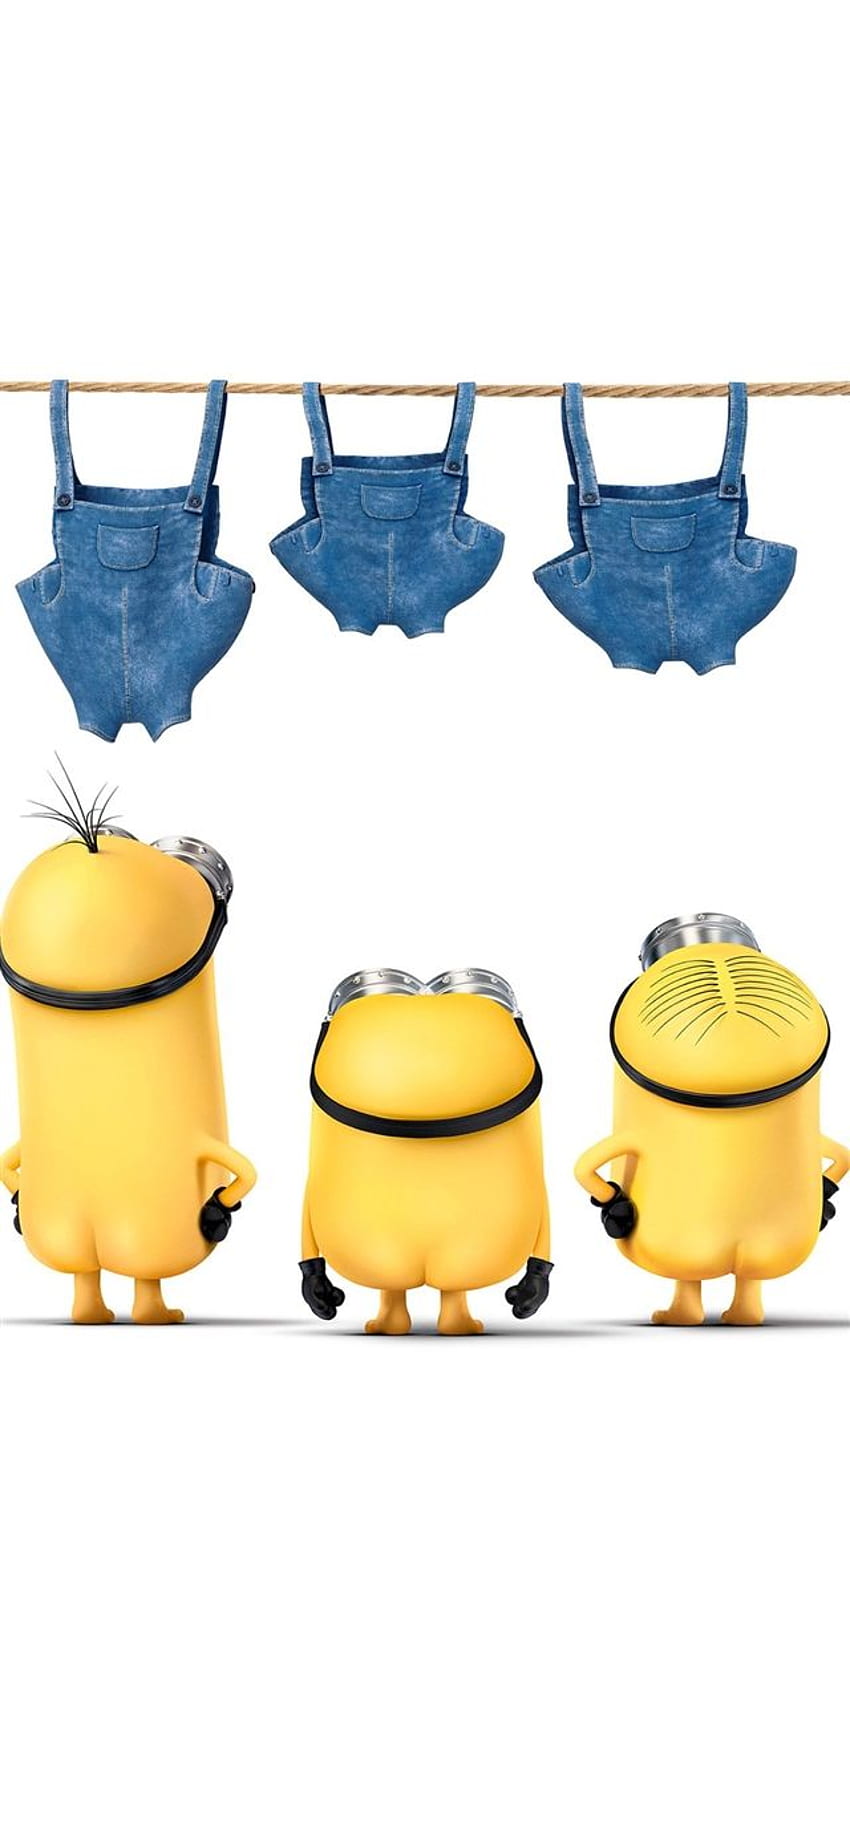 Minions Despicable nude me cute yellow art illustration iPhone X, Cute for HD 전화 배경 화면